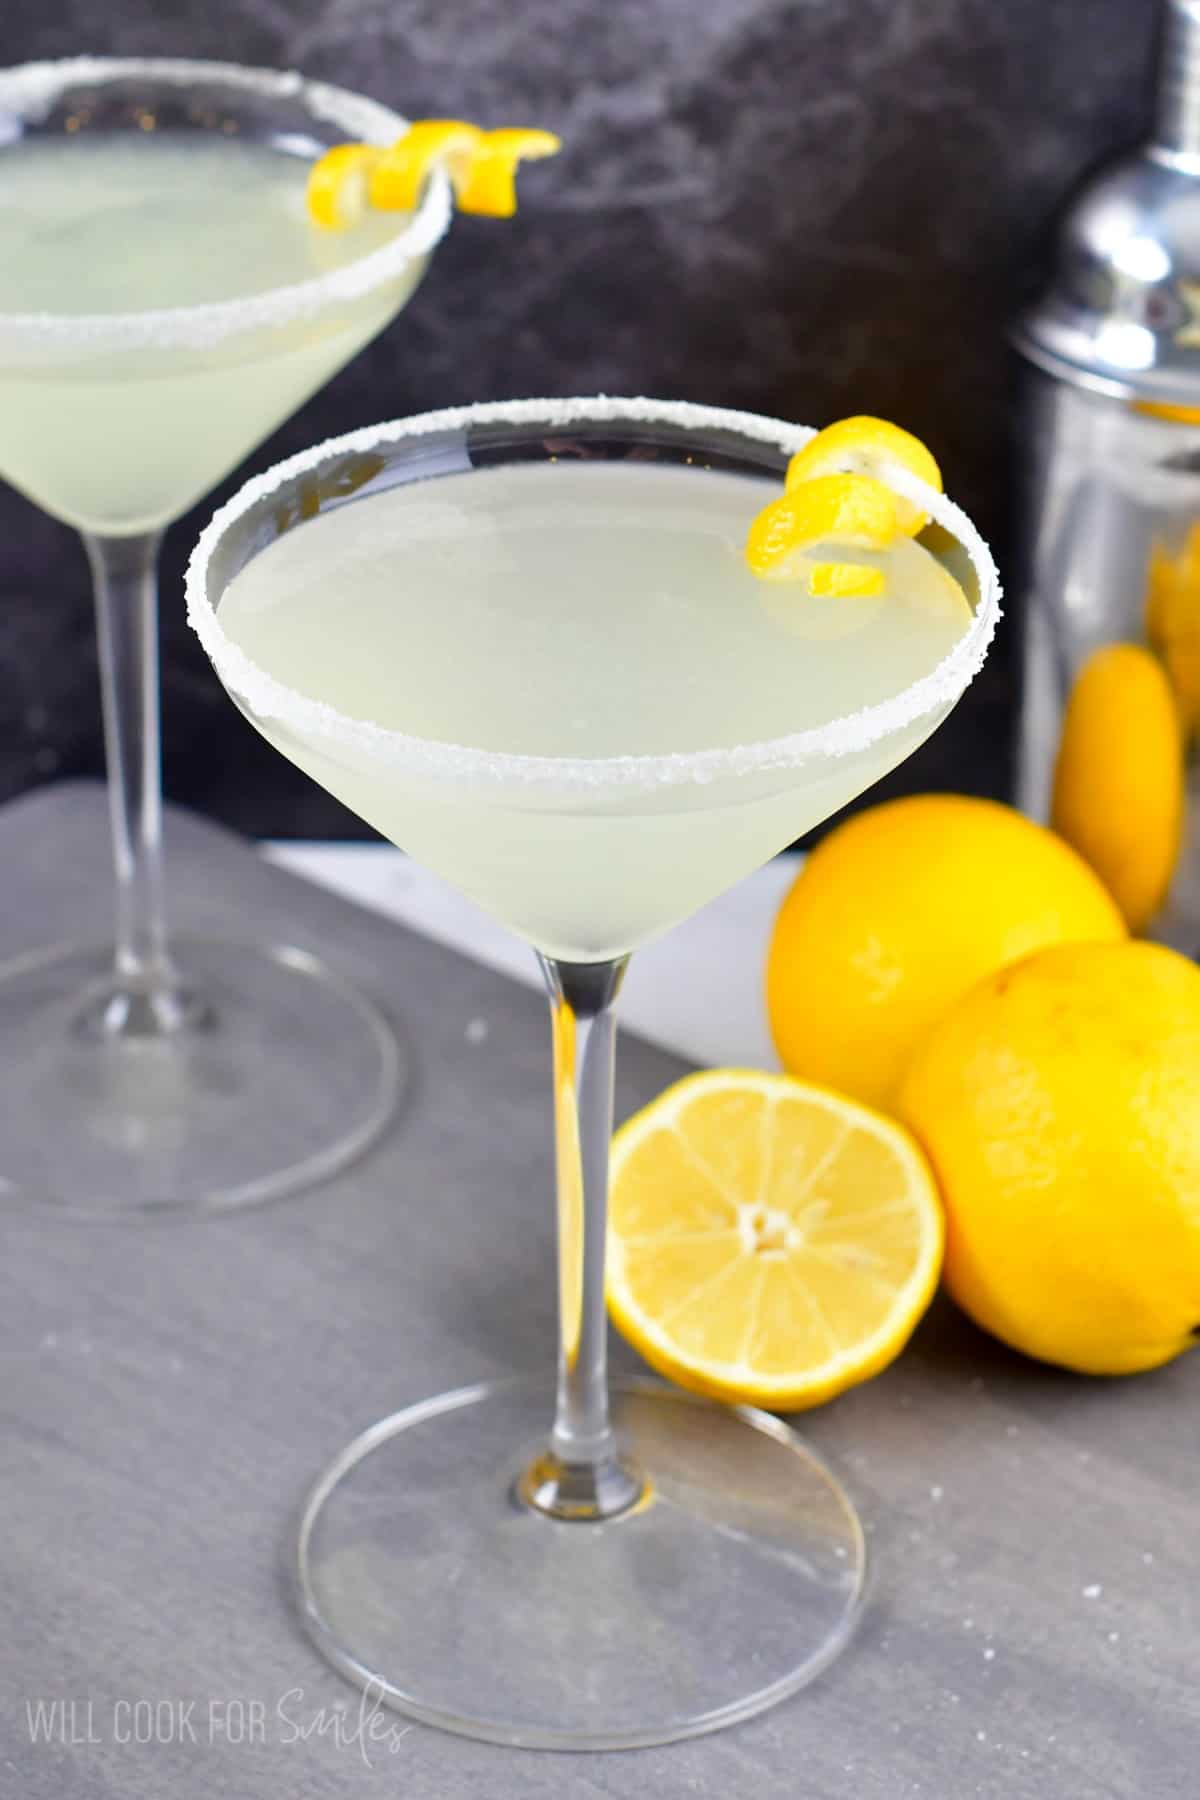 Lemon drop martini in a martini glass with sugar on the rim and a lemon twist on the side of the glass as garnish.